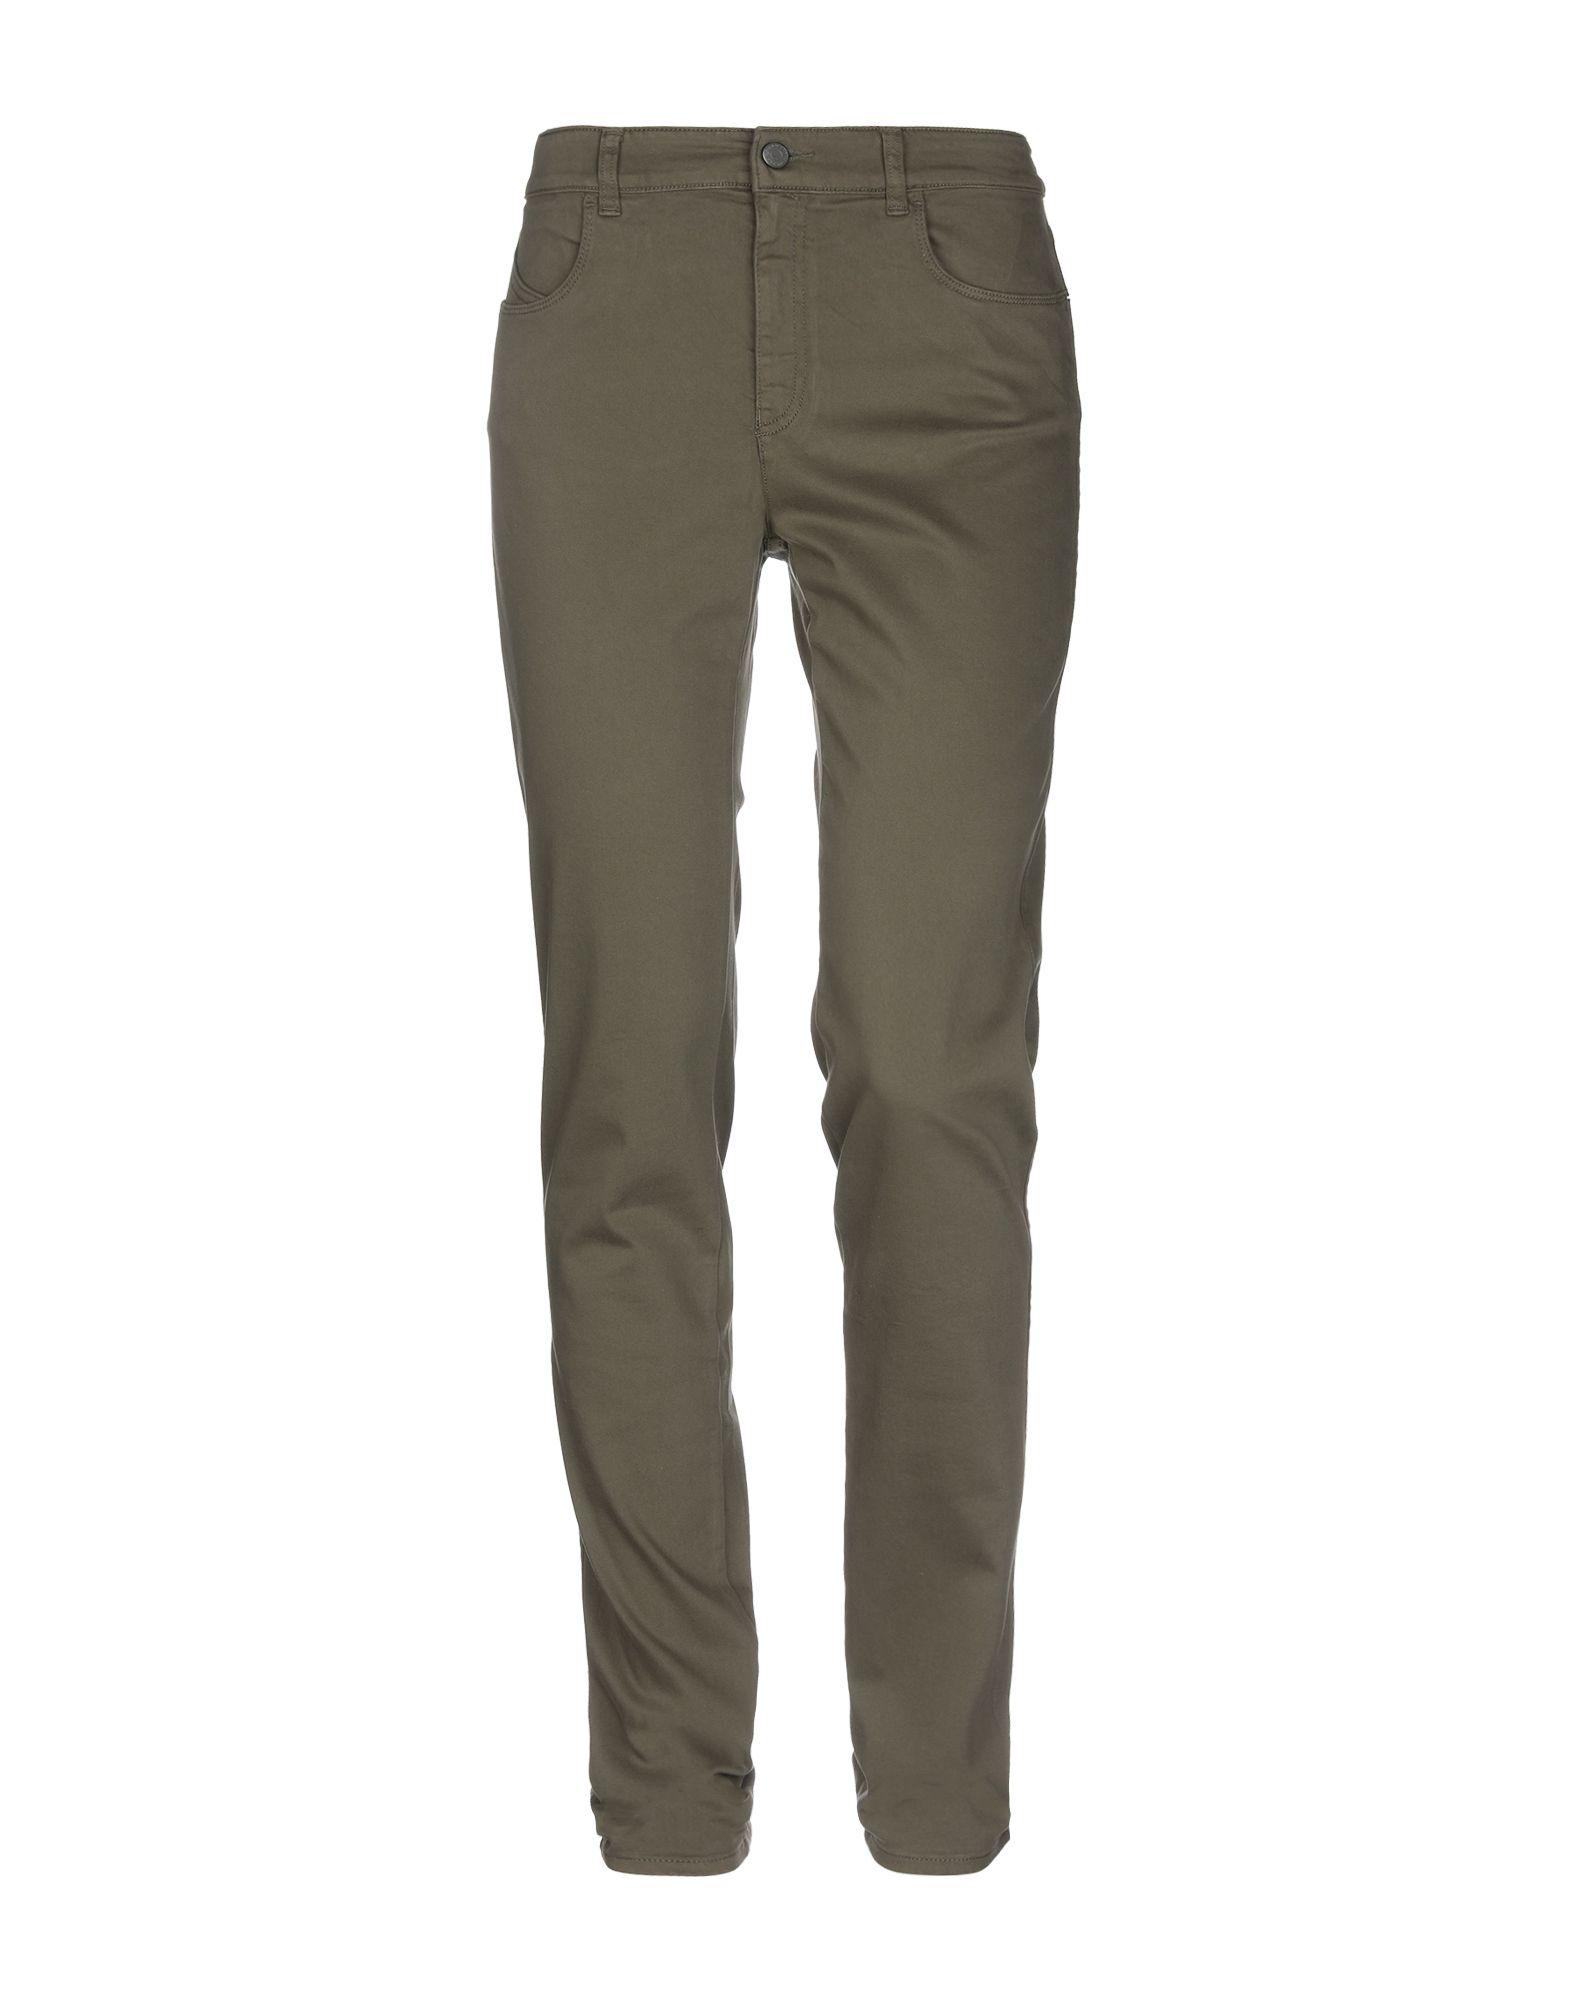 Armani Jeans Cotton Casual Trouser in Military Green (Green) - Lyst